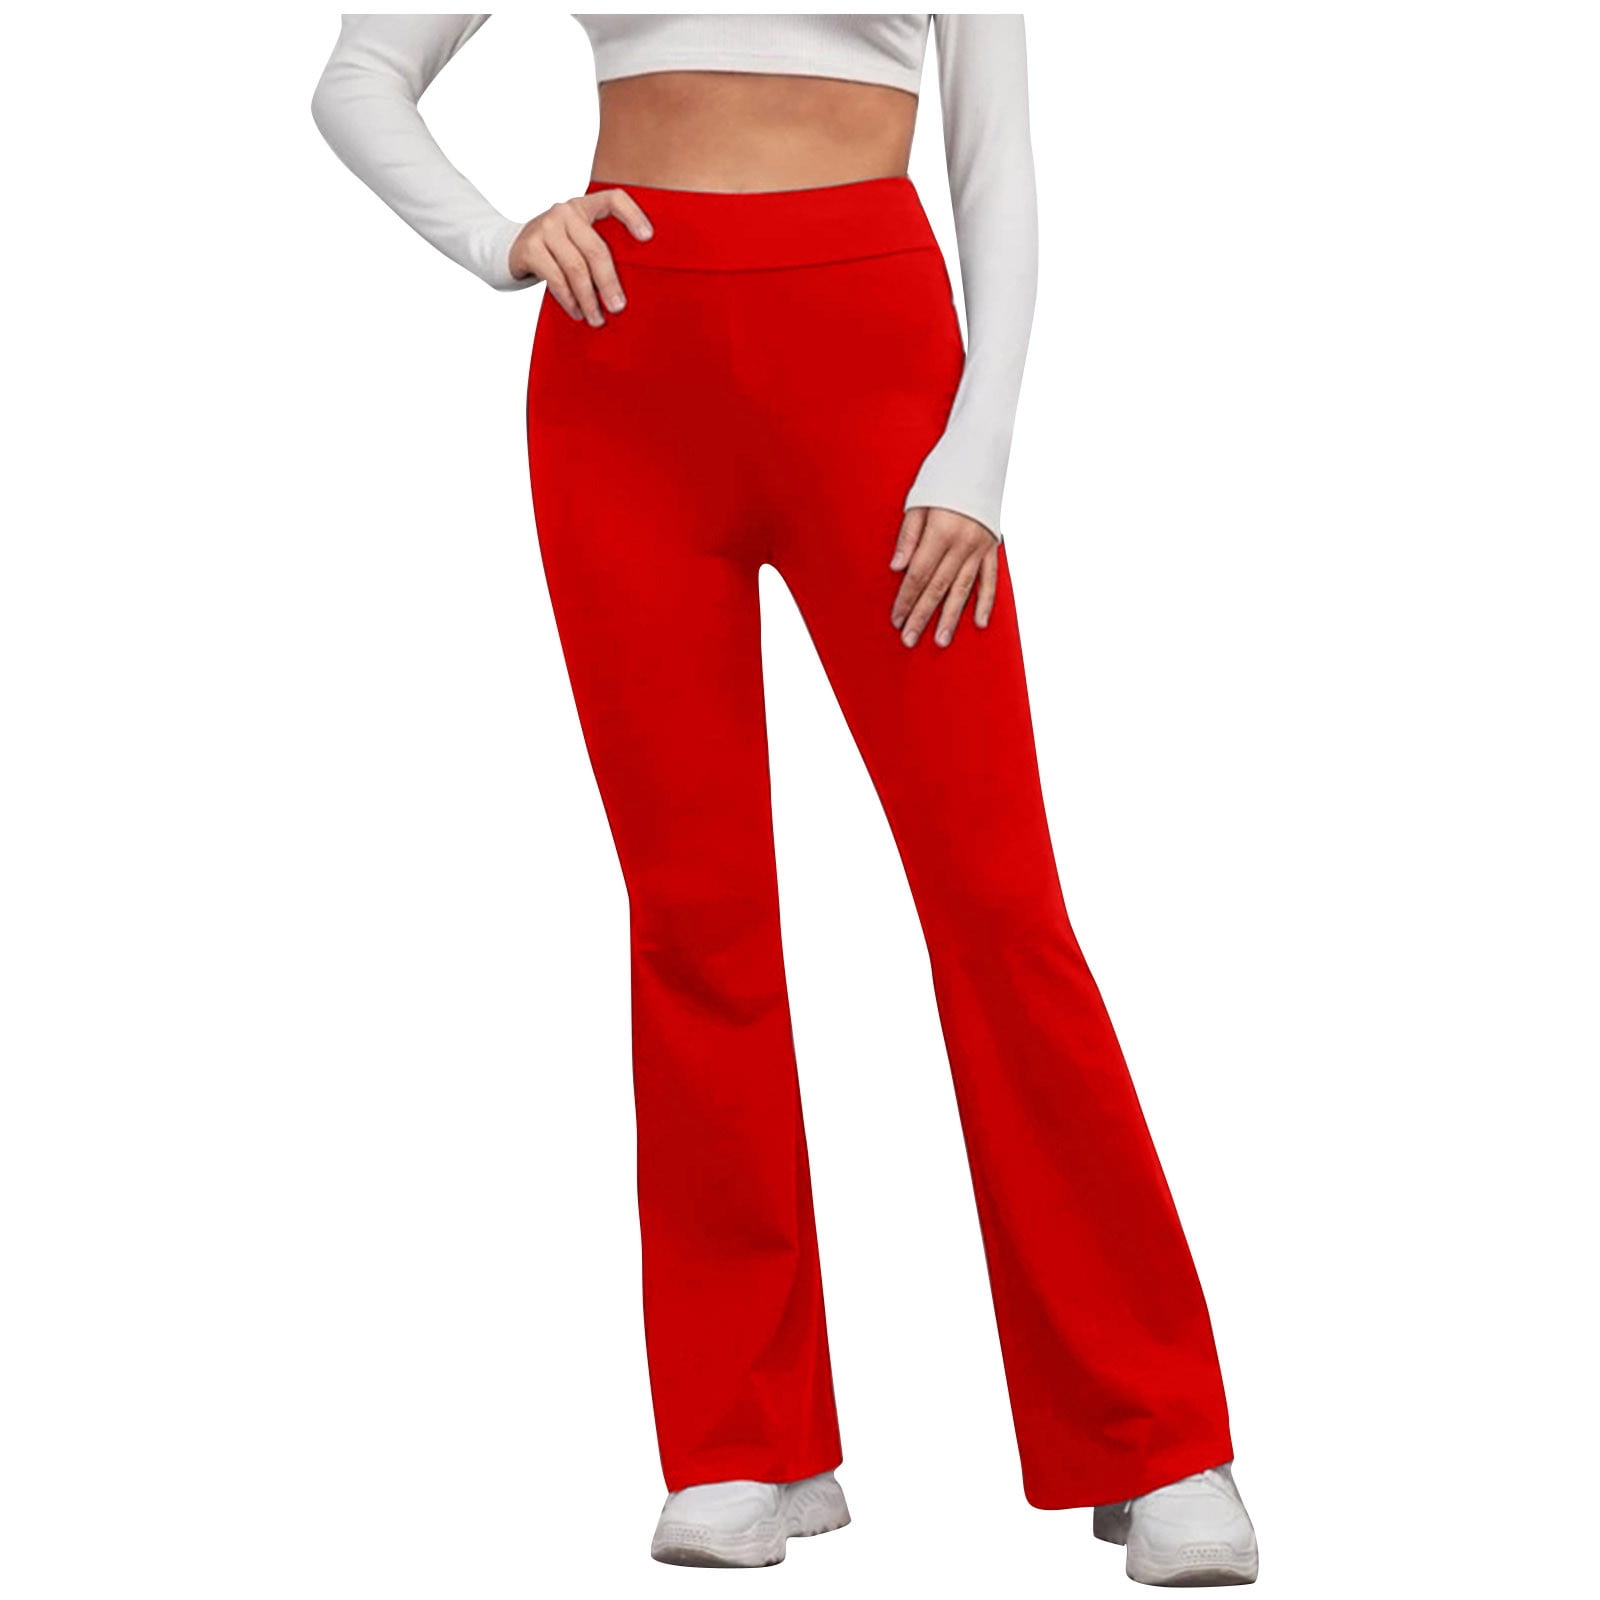  BECLOH Bootcut Yoga Pants with 4 Pockets Wide Leg for